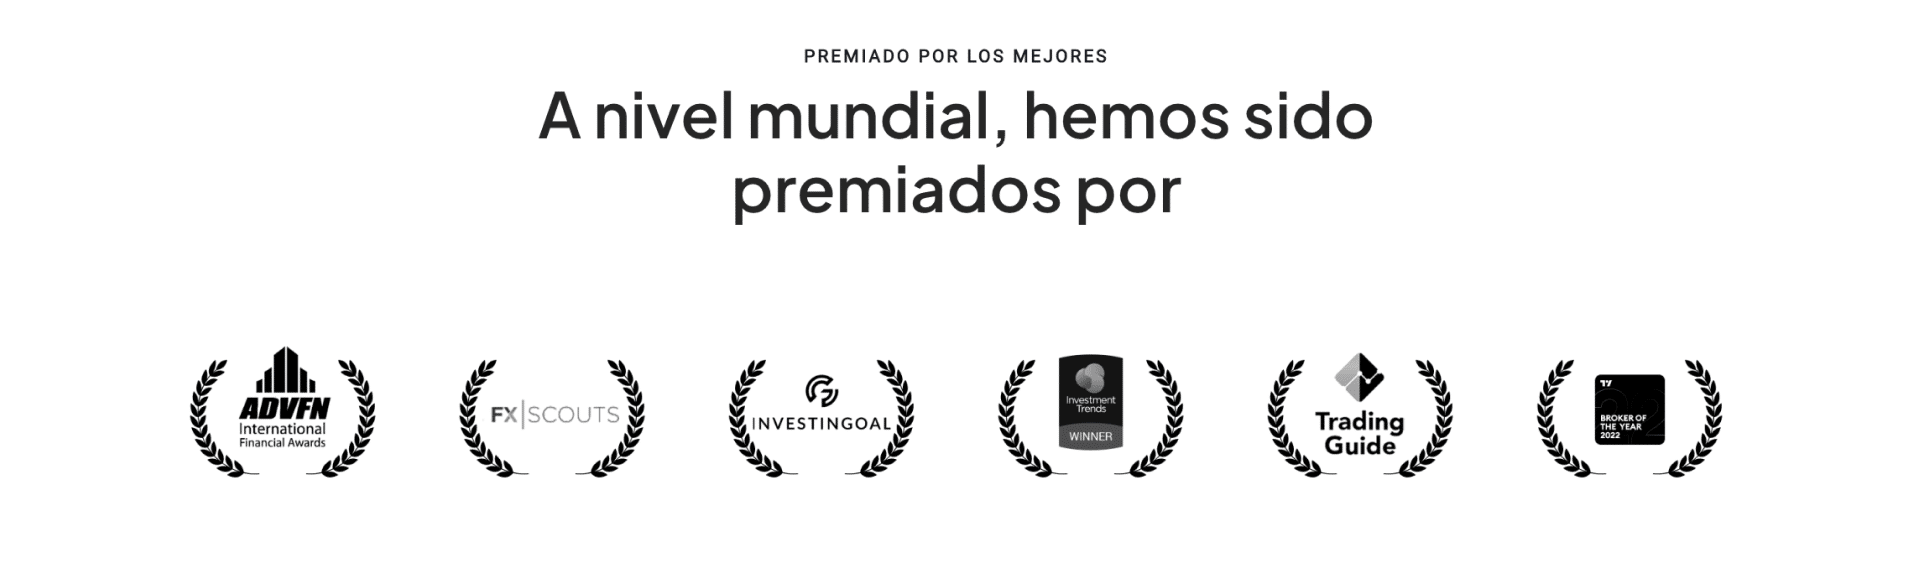 Pepperstone premios a nivel mundial